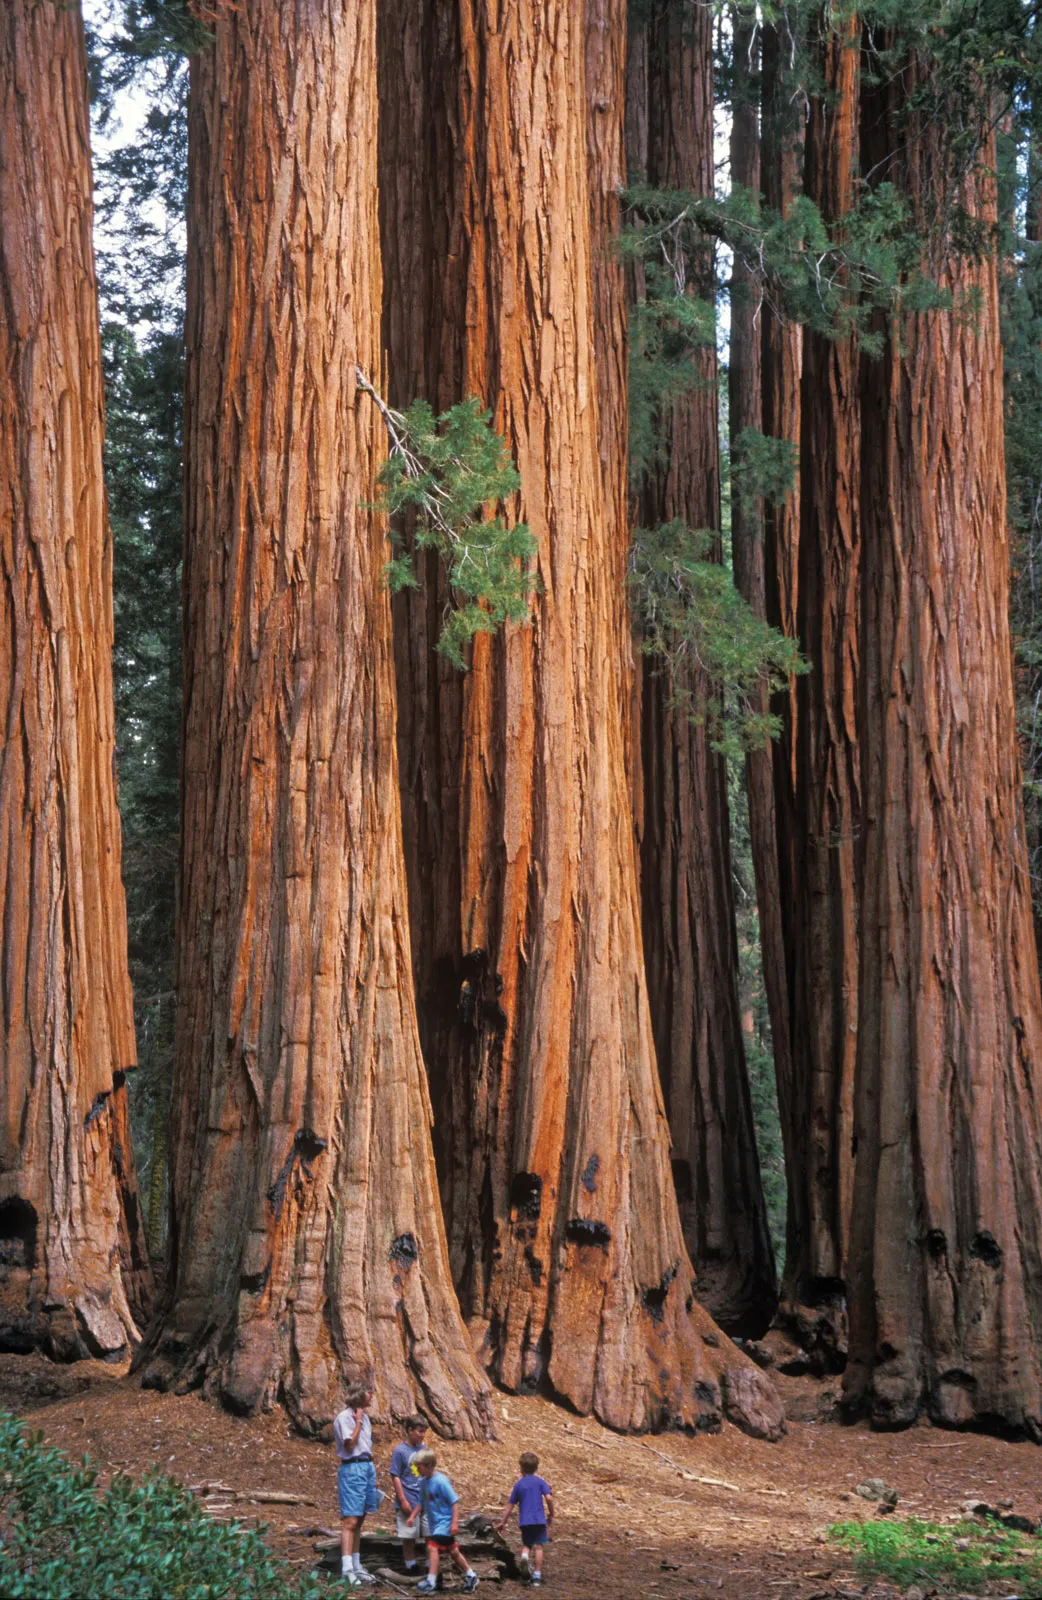 BIGGEST TREE (SEQUOIA TREES)-Biggest Things in the World